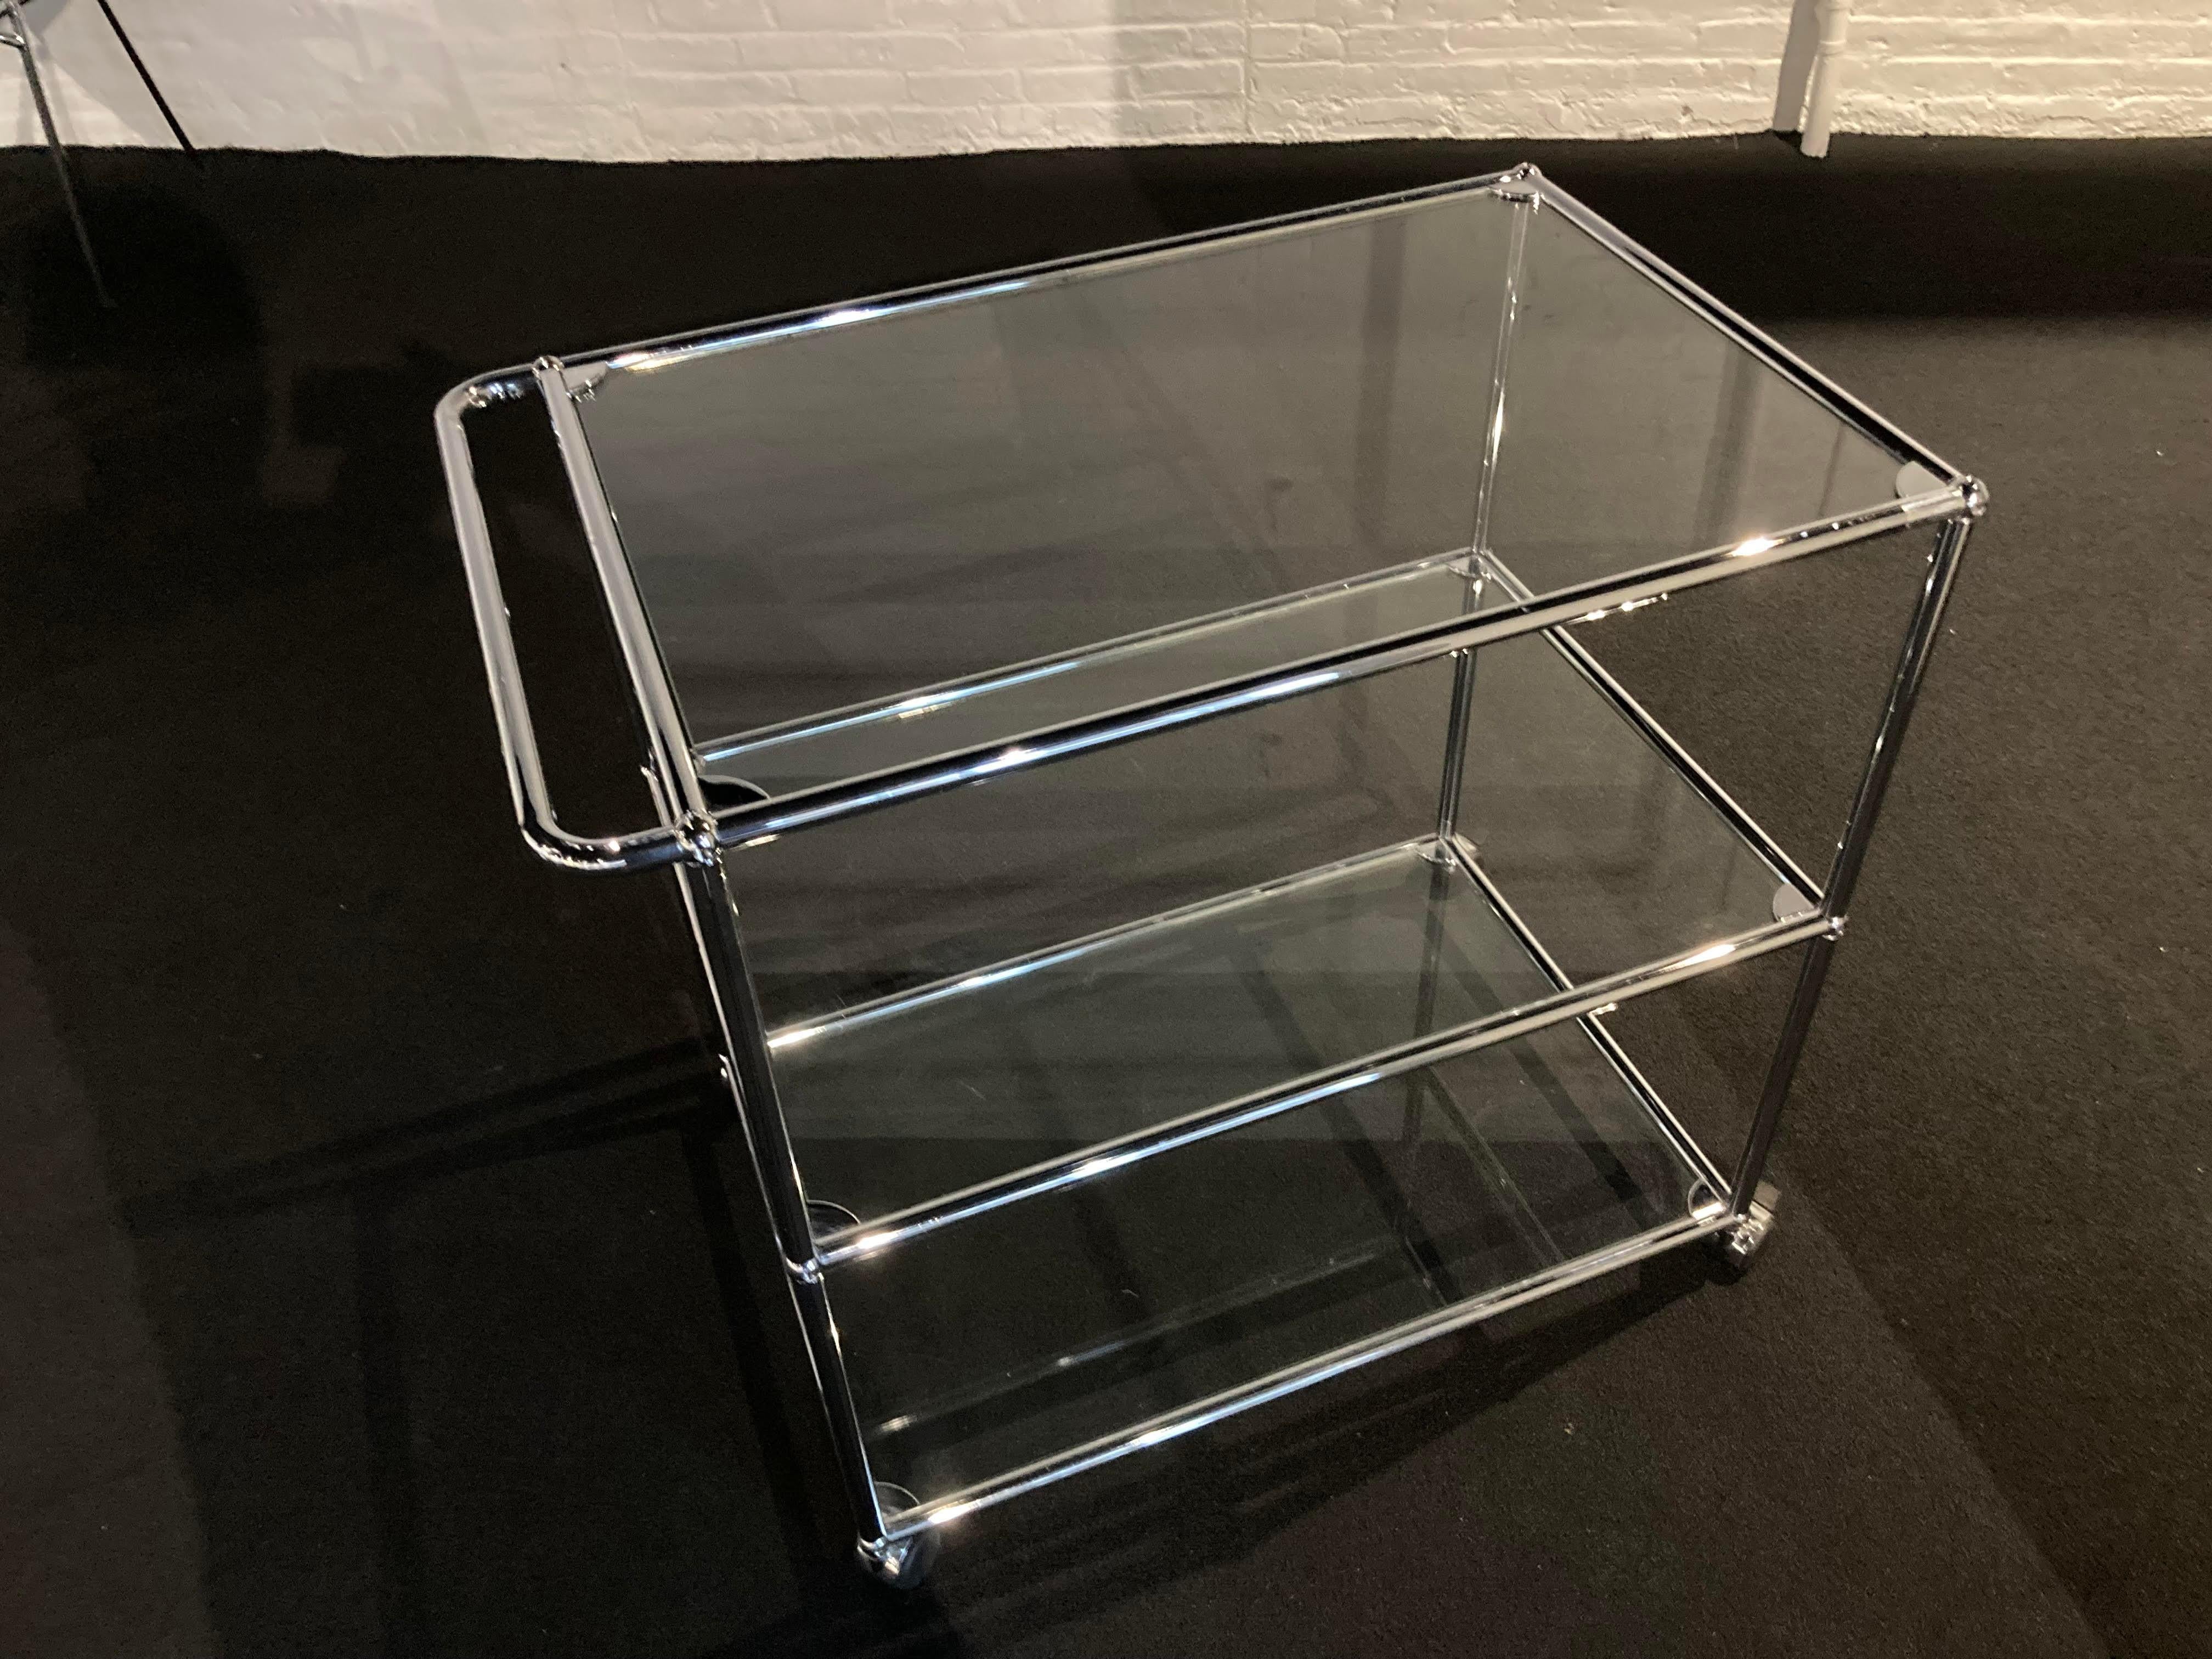 This modern bar cart offers plenty of space for all your entertaining and storage needs. . Designed by Swiss architect Fritz Haller and Paul Schaerer in 1963. Made from chrome plated steel tubes, the USM Haller system is built to last for